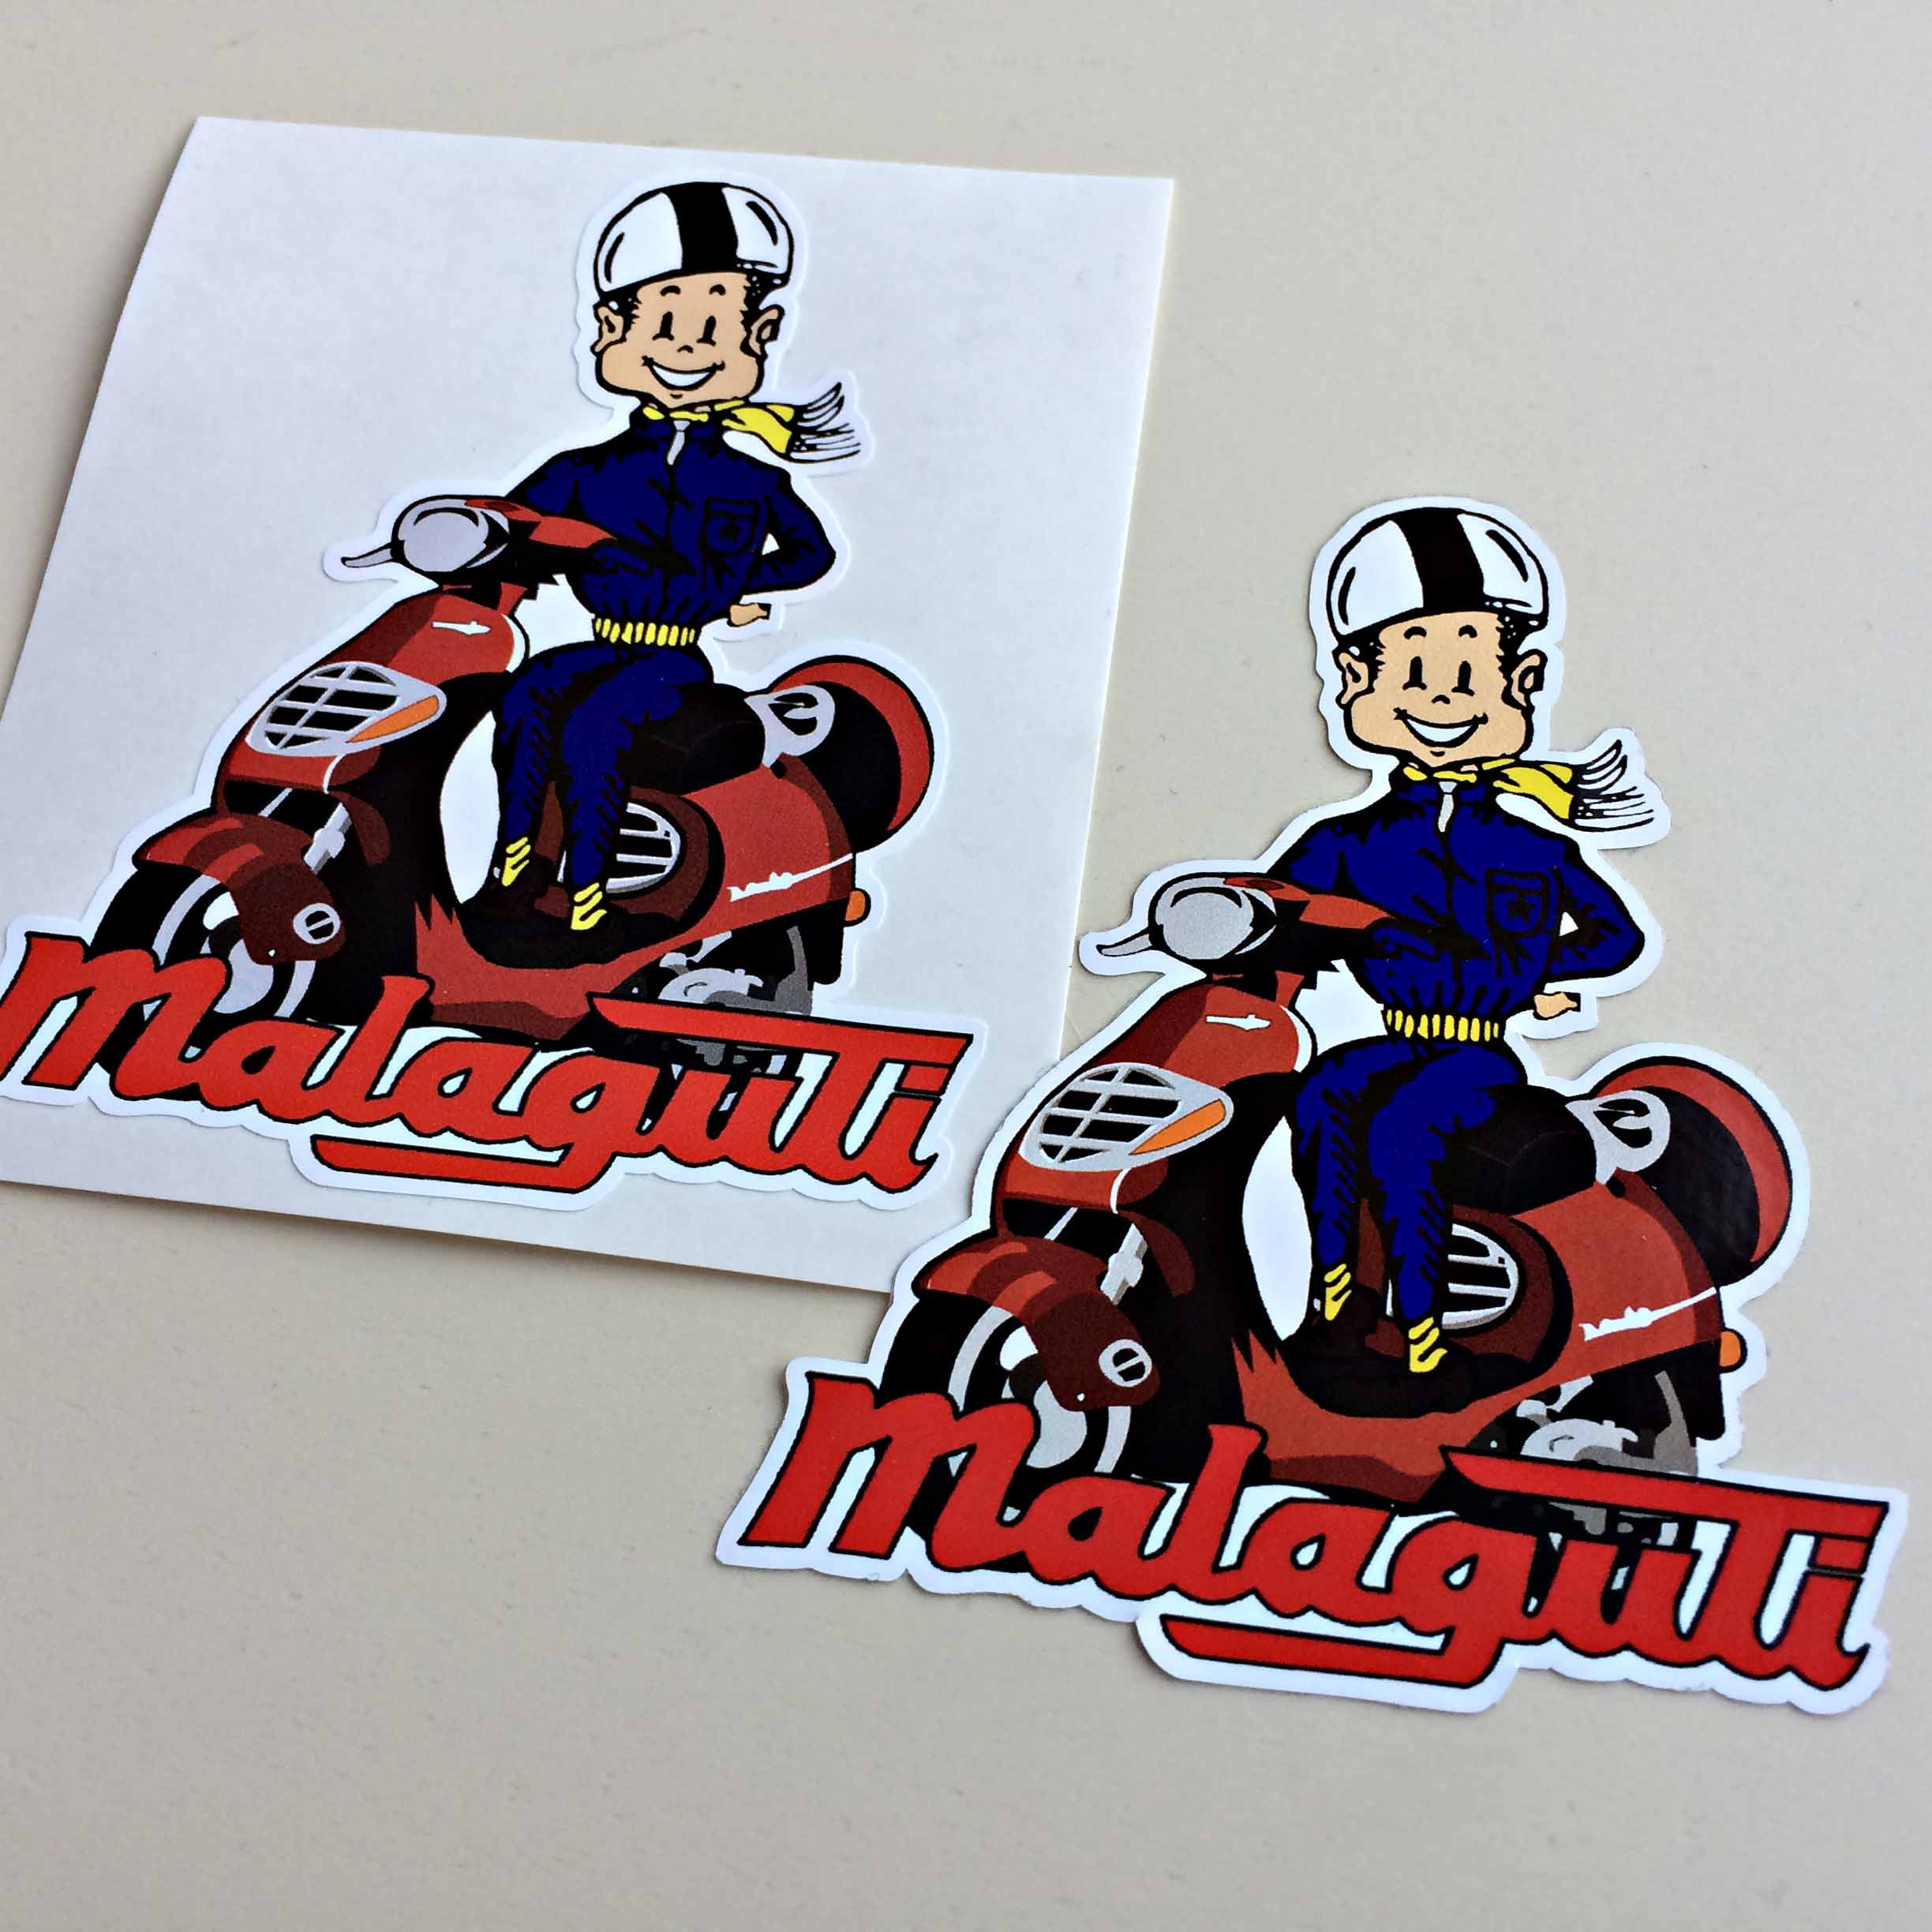 MALAGUTI MOPED STICKERS. Malaguti red lettering below a red scooter. A humorous image of a man smiling sat aboard. He is wearing a helmet and a blue suit with yellow scarf and belt.